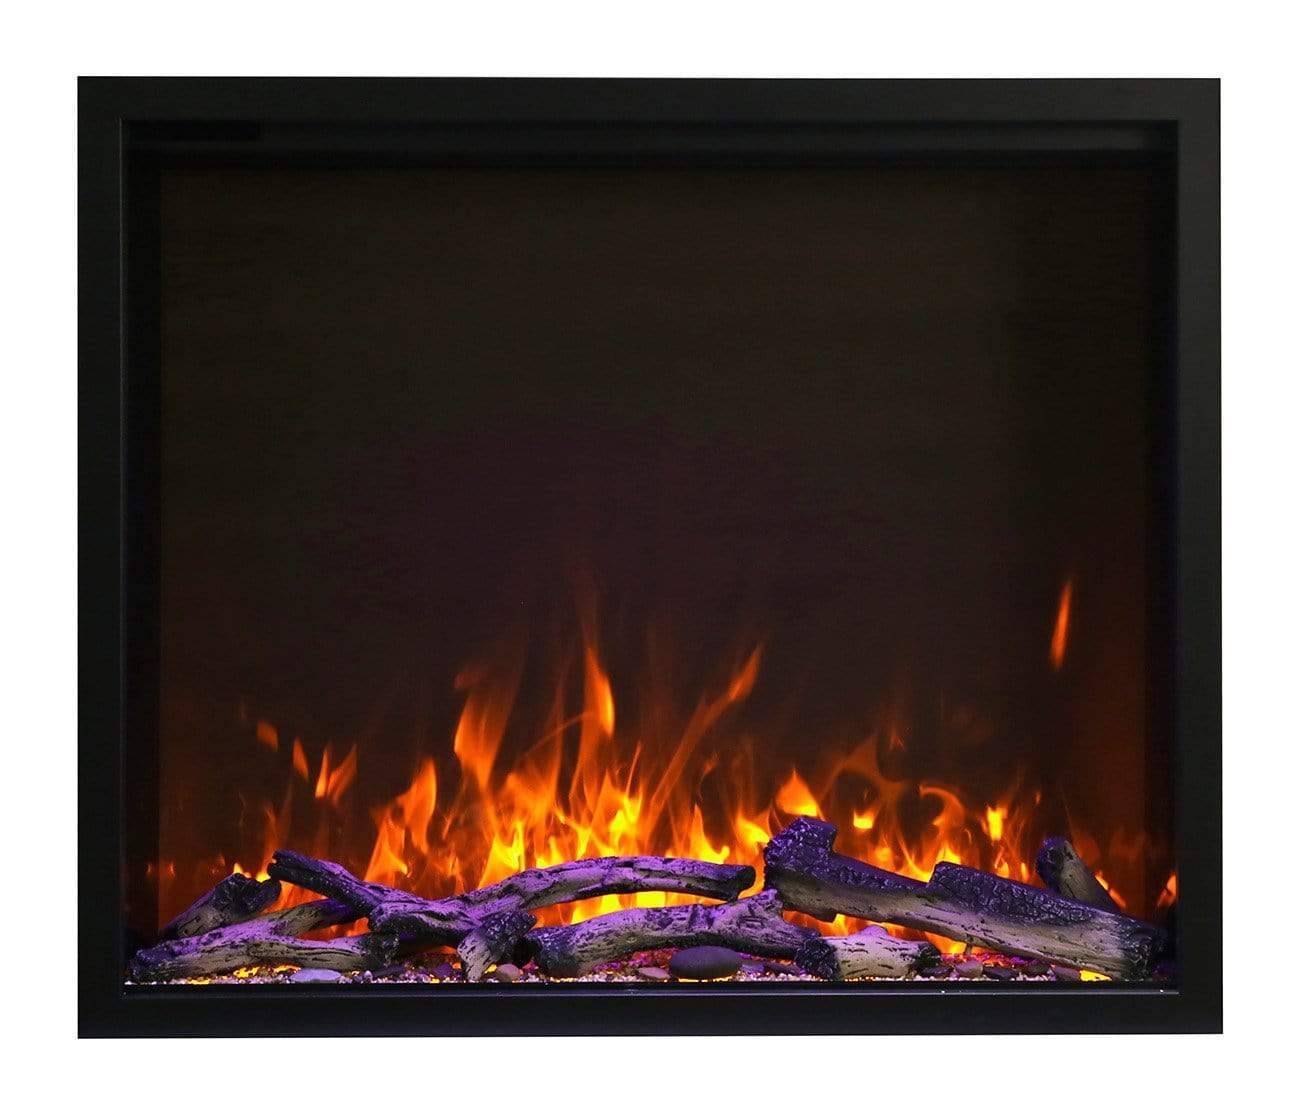 StarWood Fireplaces - Amantii TRD-44 Traditional Series - 44-Inch Electric Fireplace -